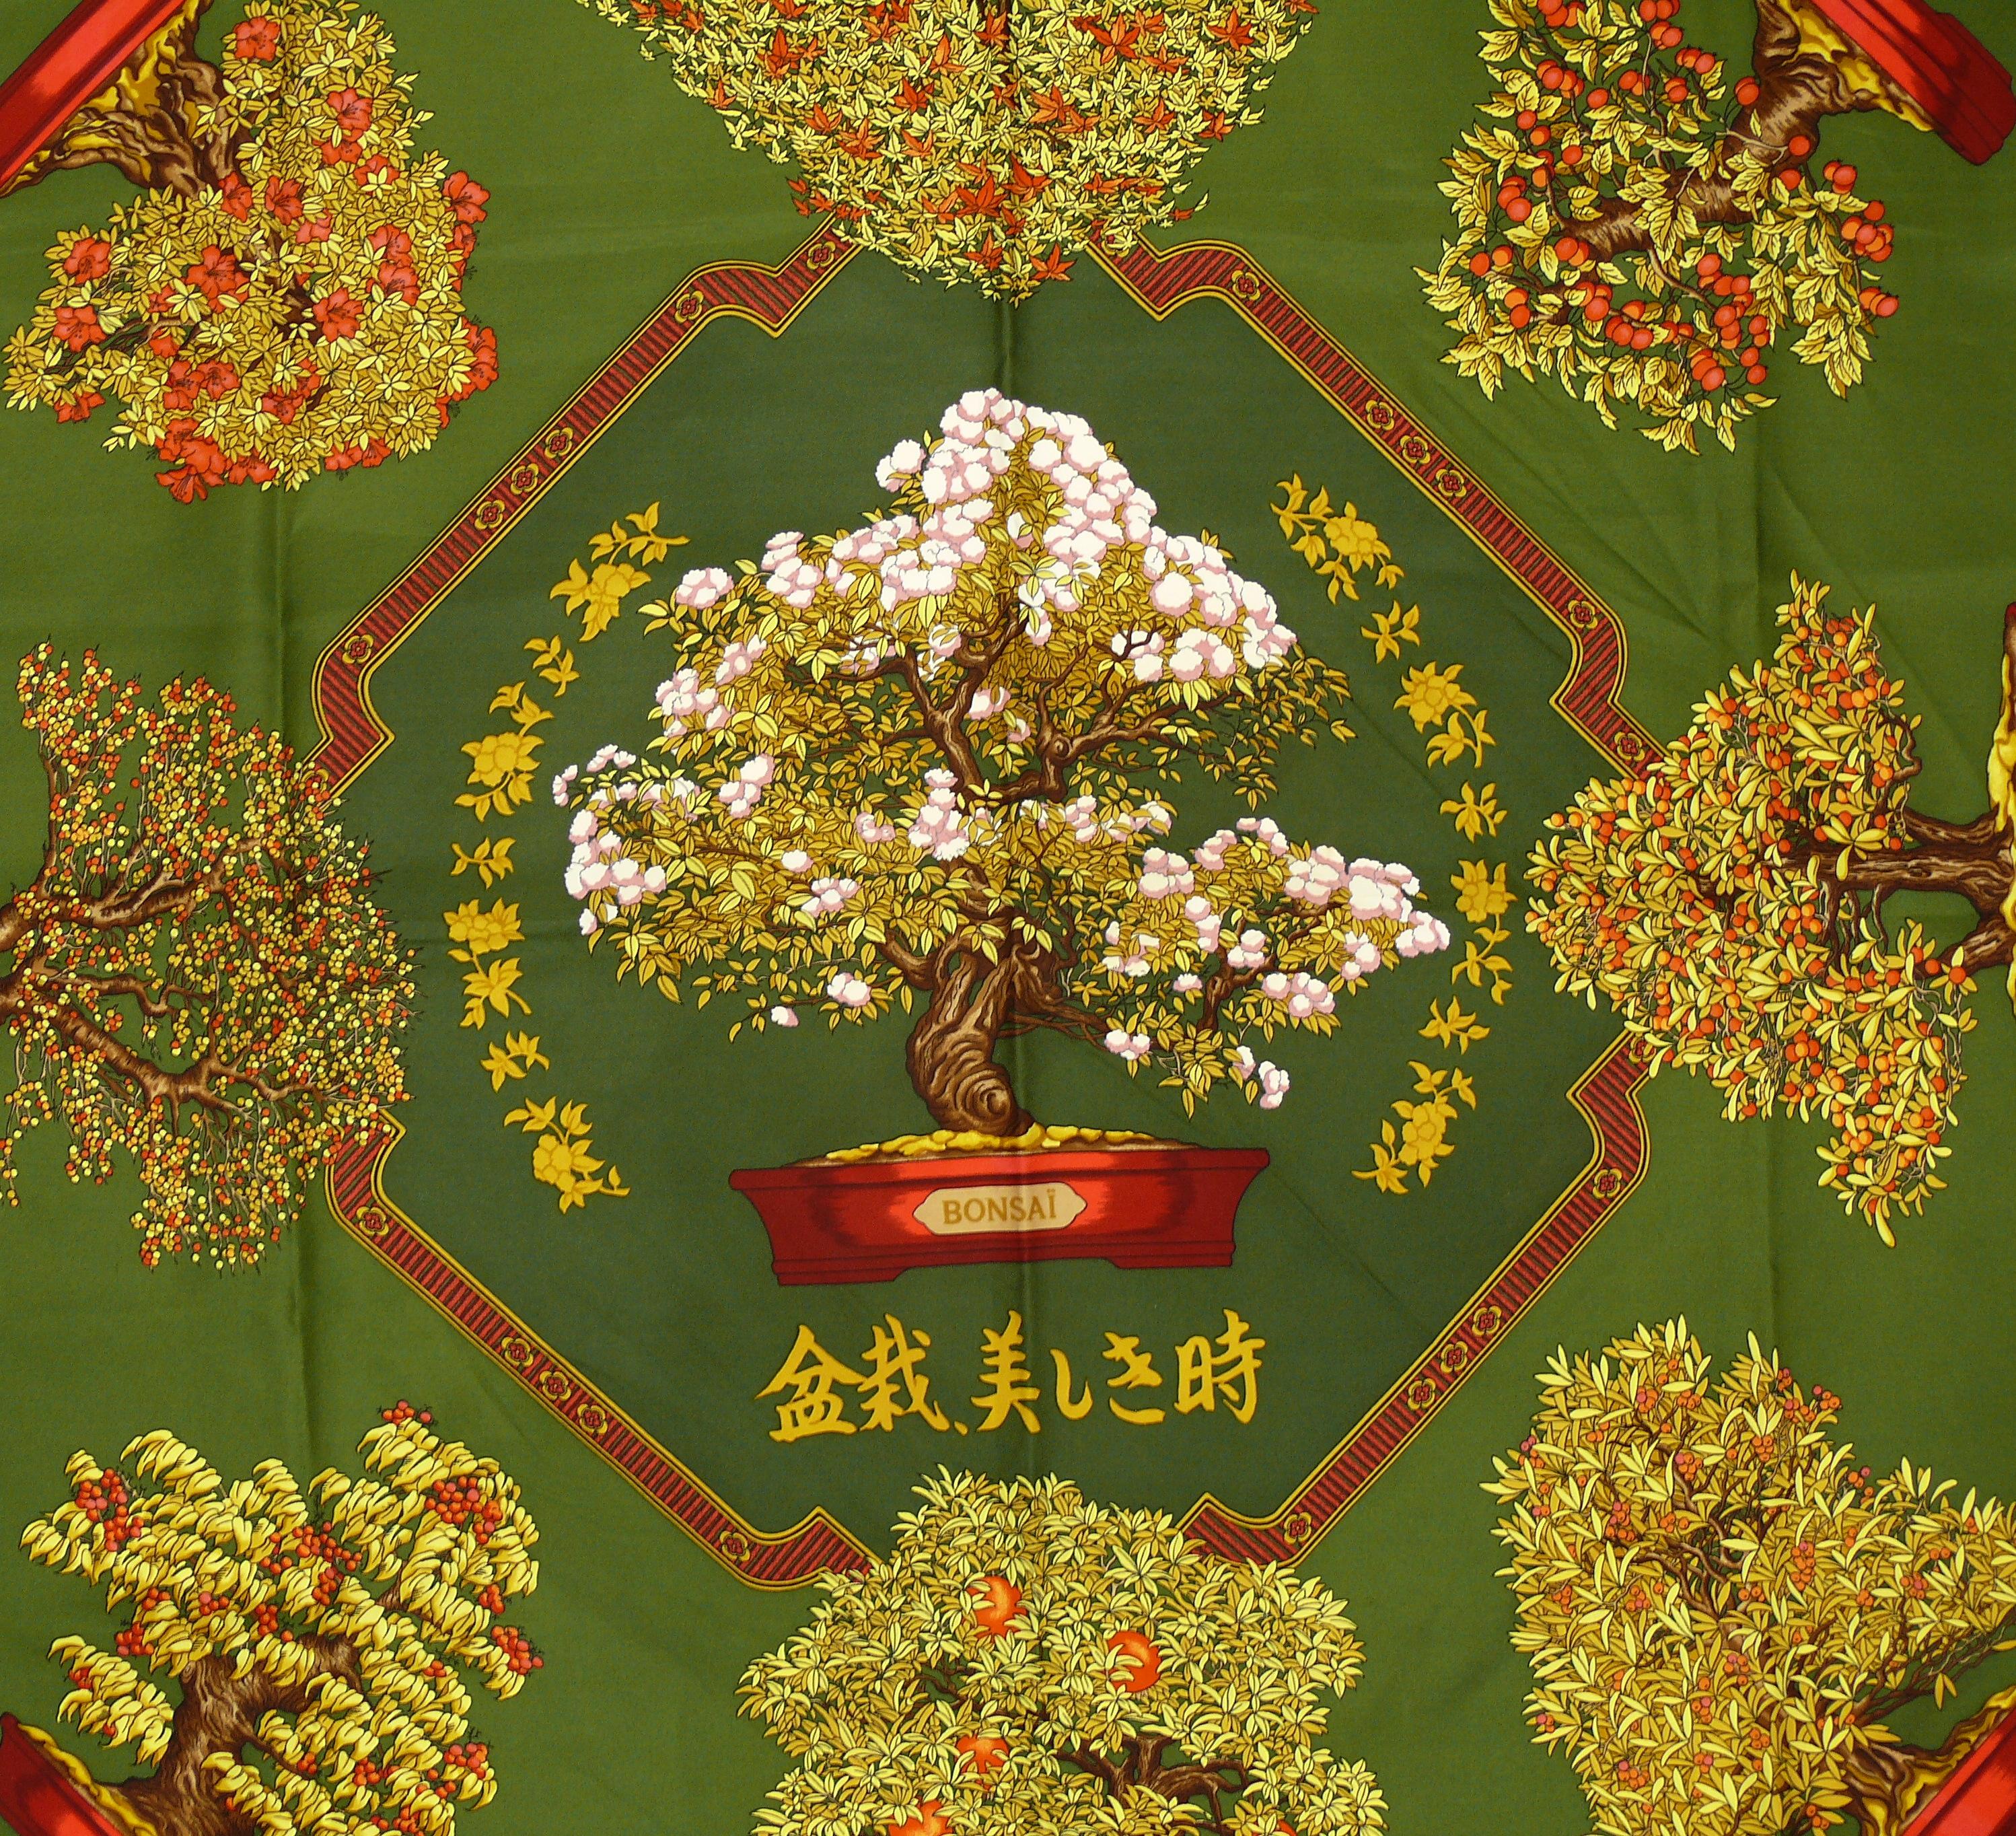 HERMES vintage silk carré scarf LES BEAUX JOURS DE BONSAI featuring bonsai tree motifs on a green background.

First issued in 1991.

Designed by CATHERINE BASCHET.

This scarf features :
- Hand rolled borders.
- Plump hems.
- 100 % silk.
-